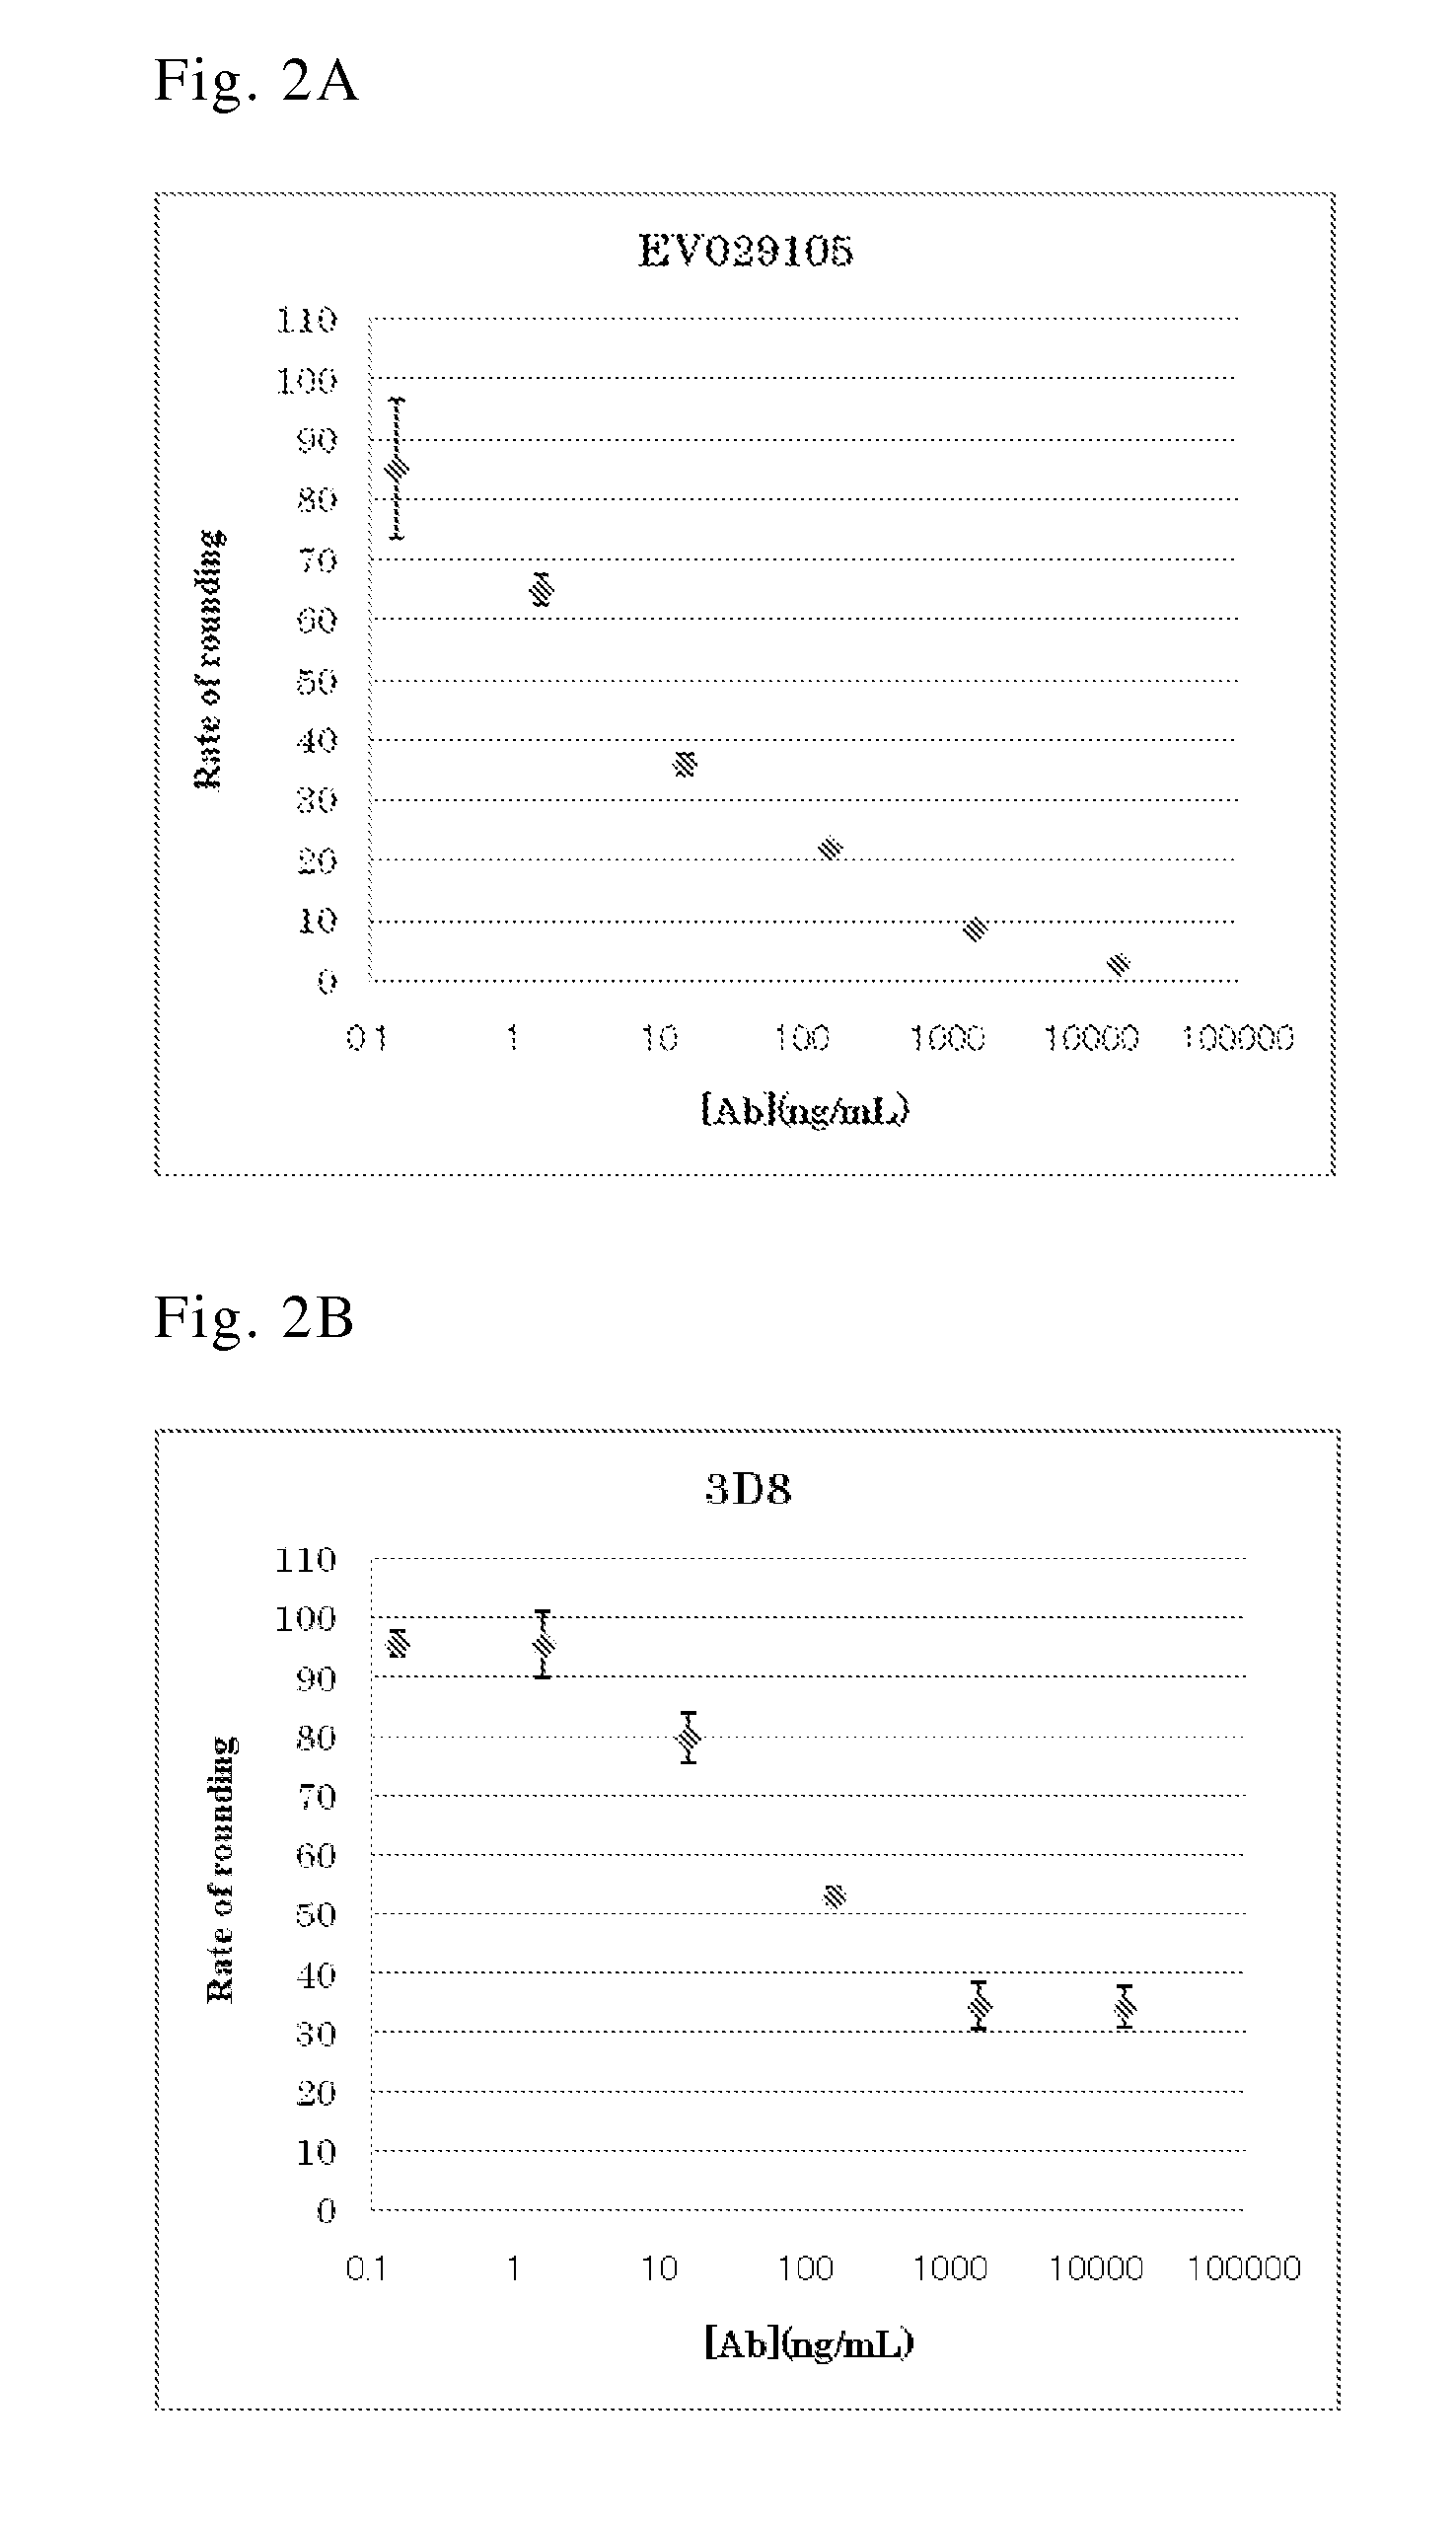 Human antibody specific to toxin produced from clostridium difficile, or antigen-binding fragment thereof